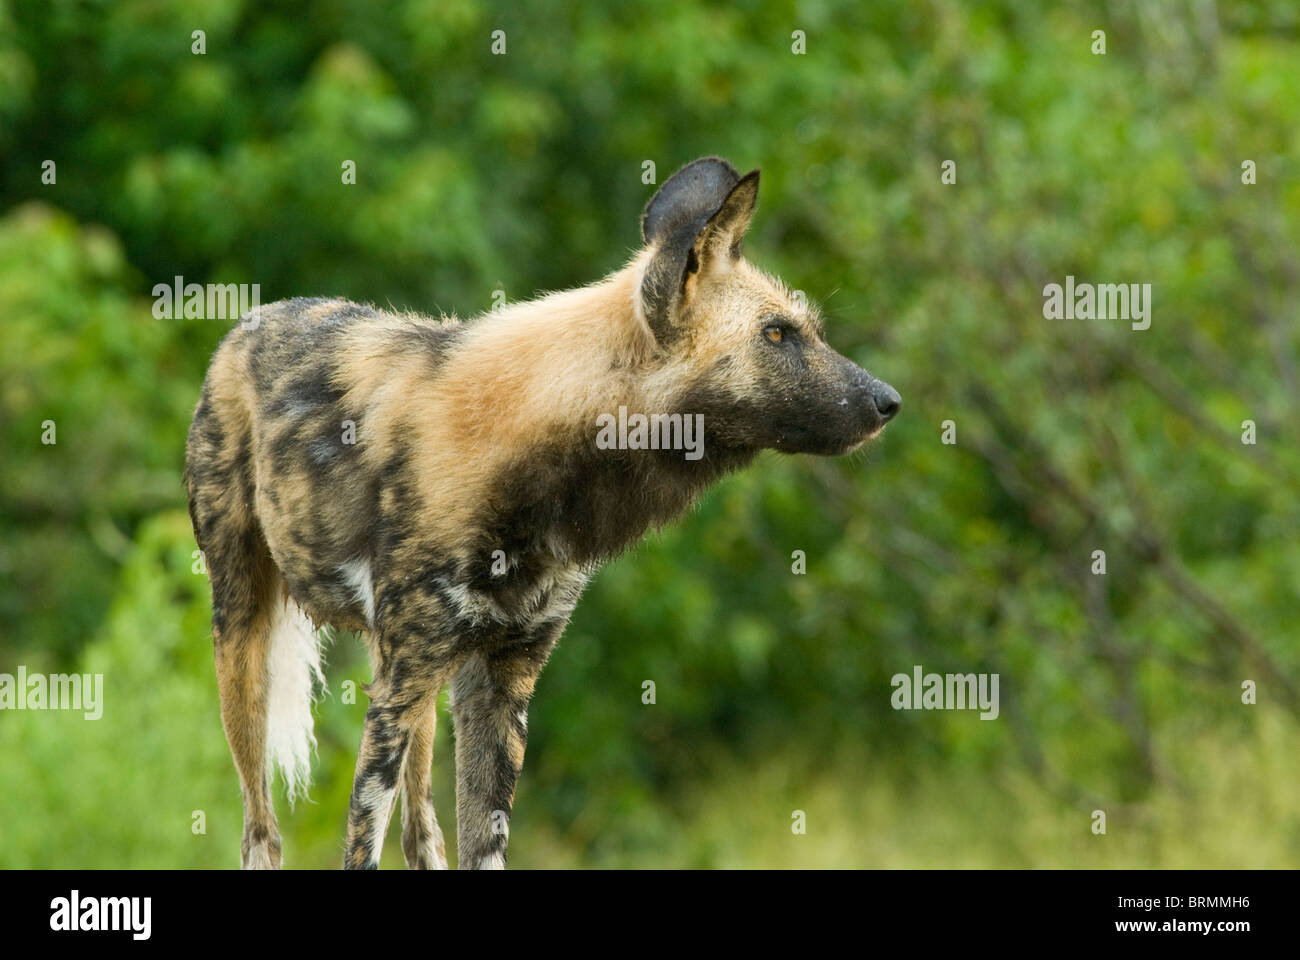 A single wild dog alert and watchful Stock Photo